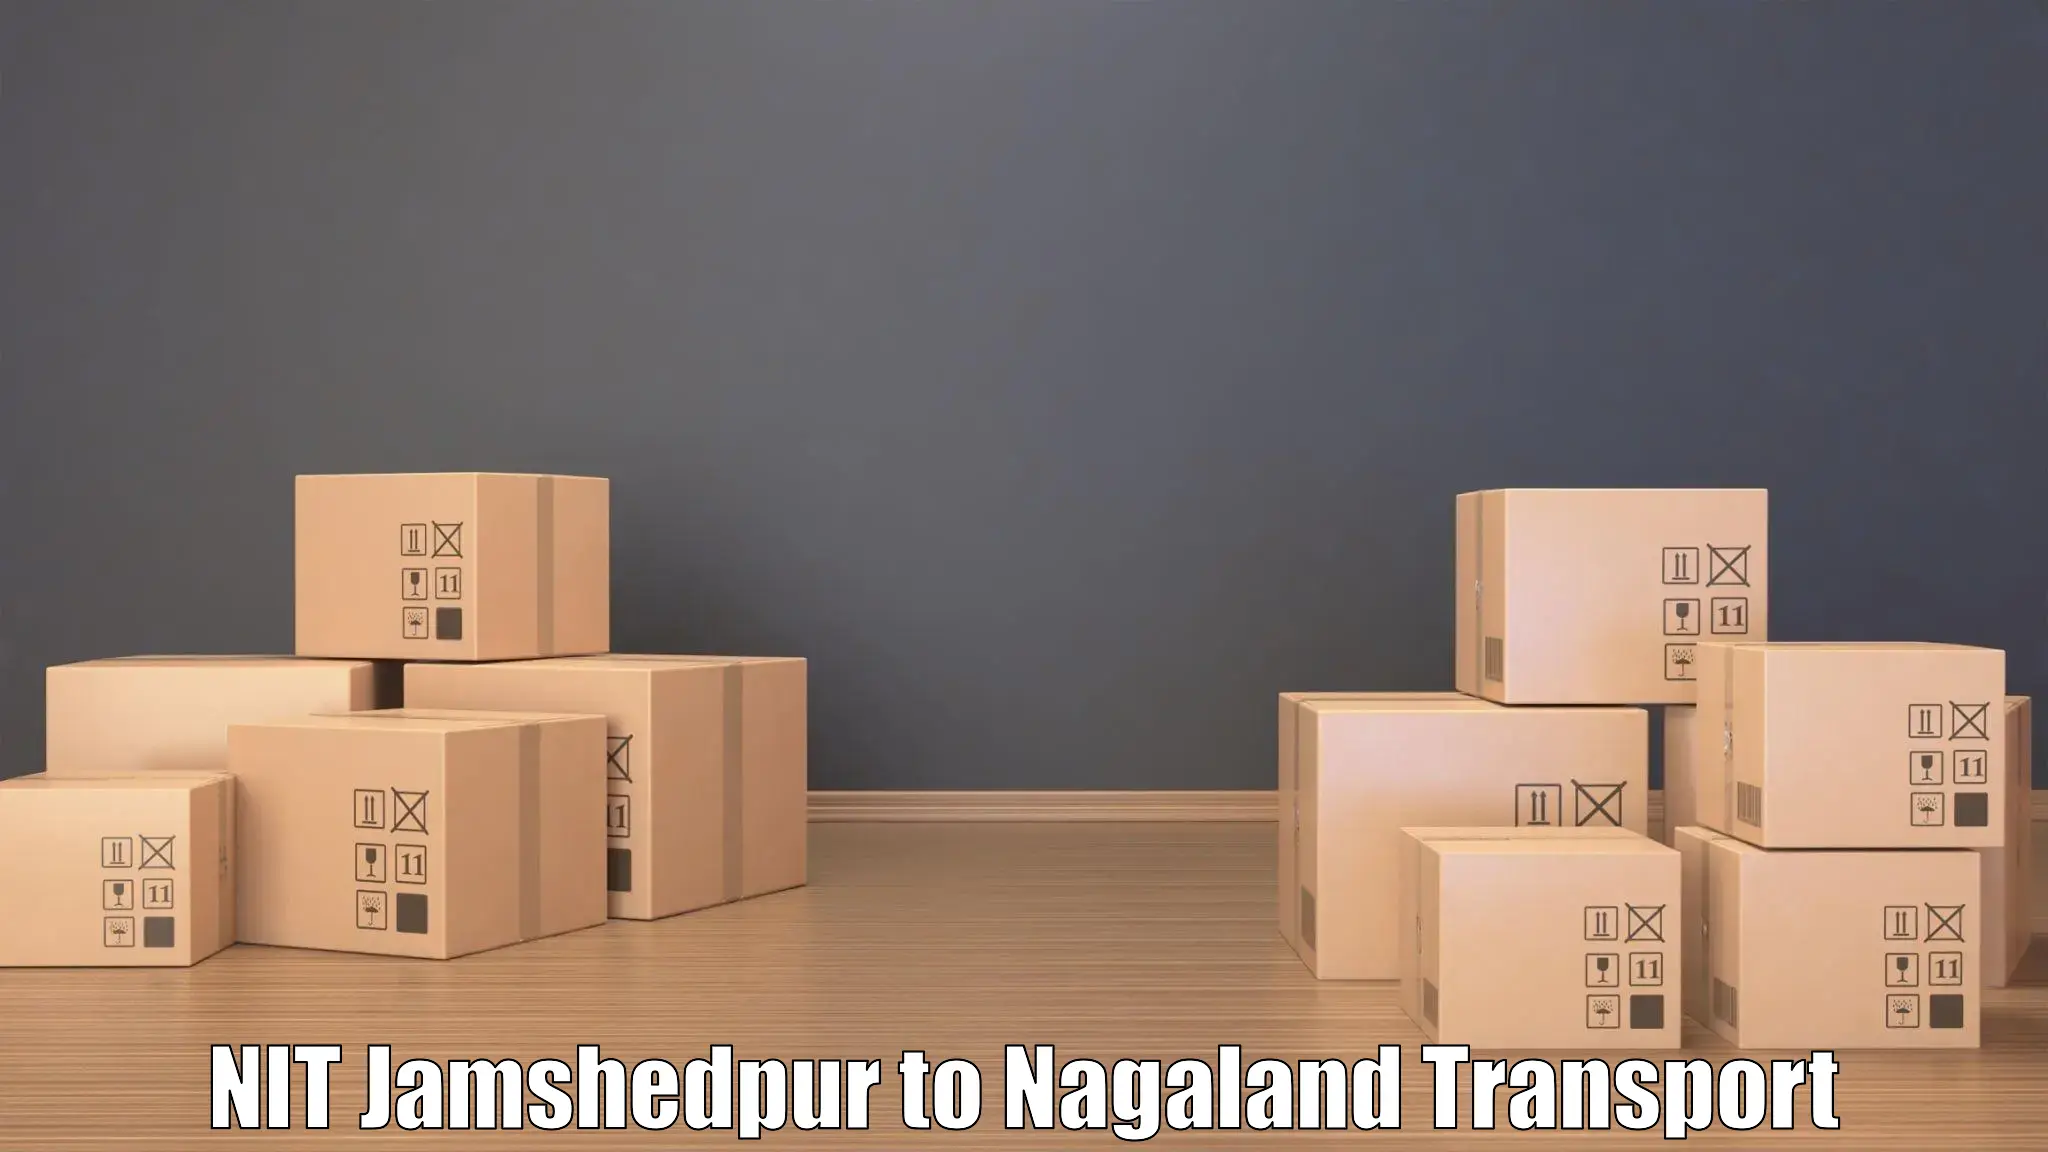 Container transport service NIT Jamshedpur to Kohima